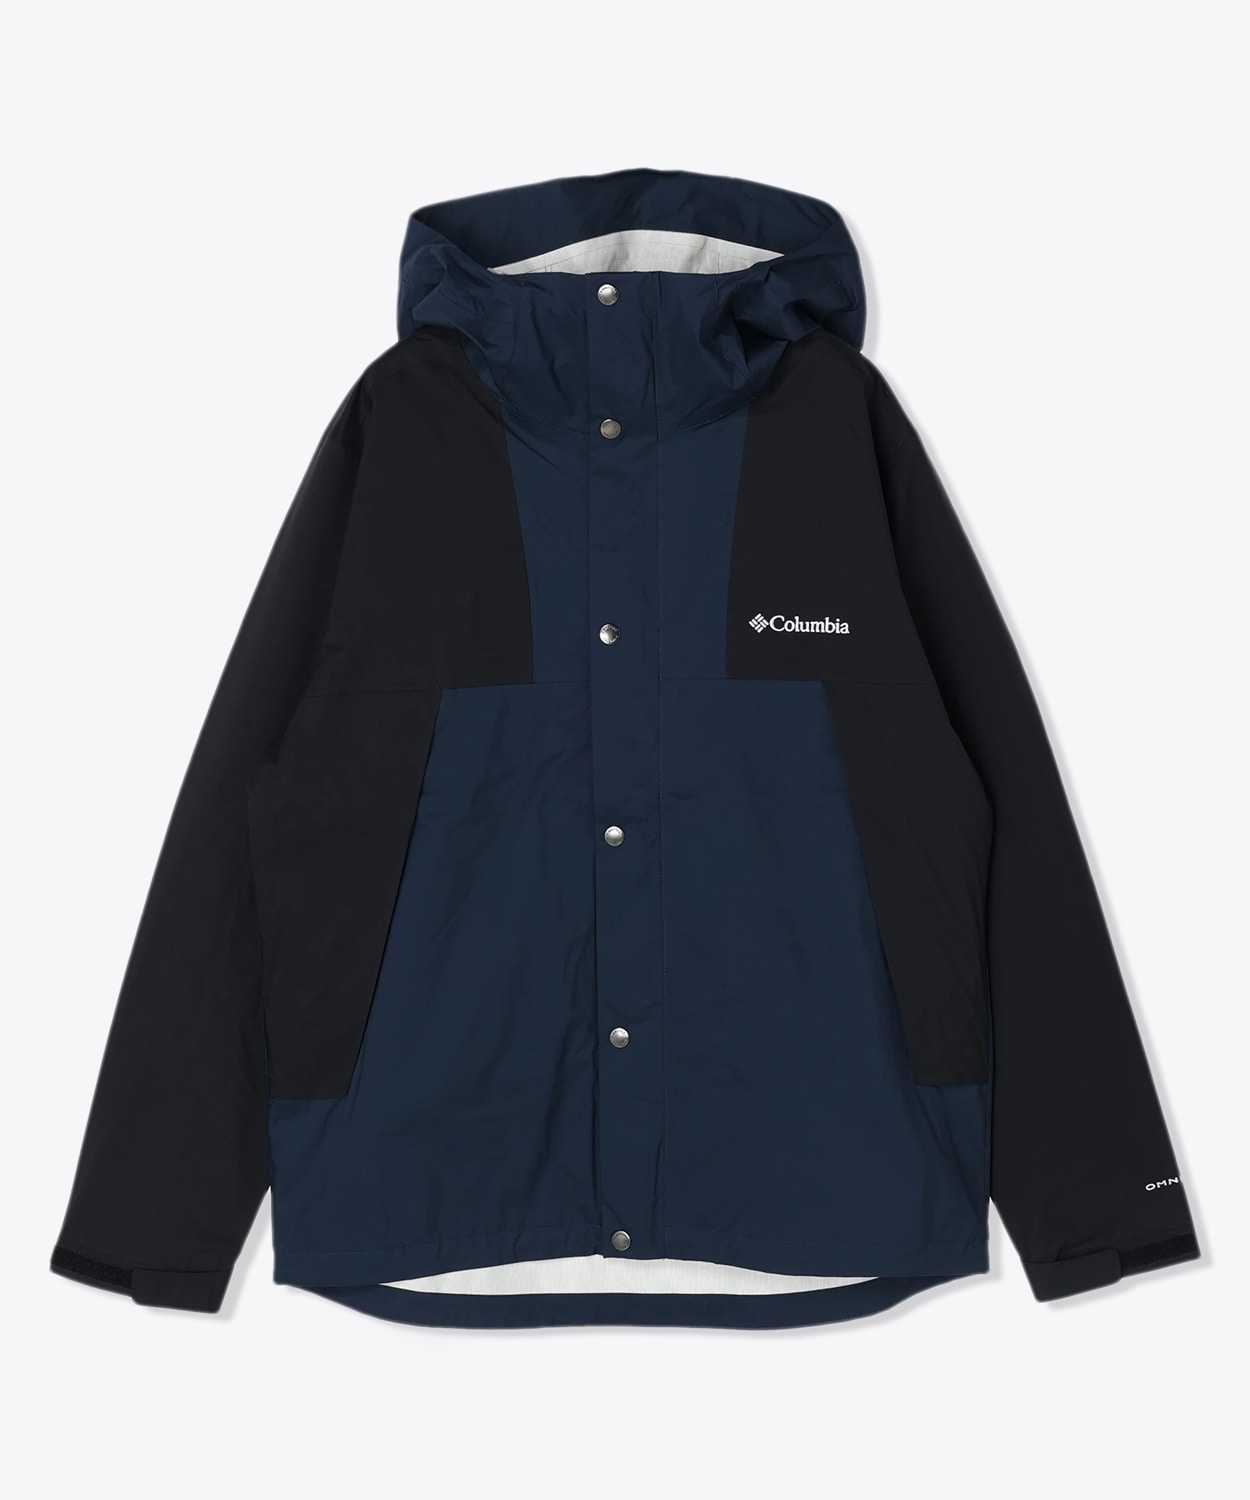 COLUMBIA SPECIAL LIMITED JACKETzscにて購入しました